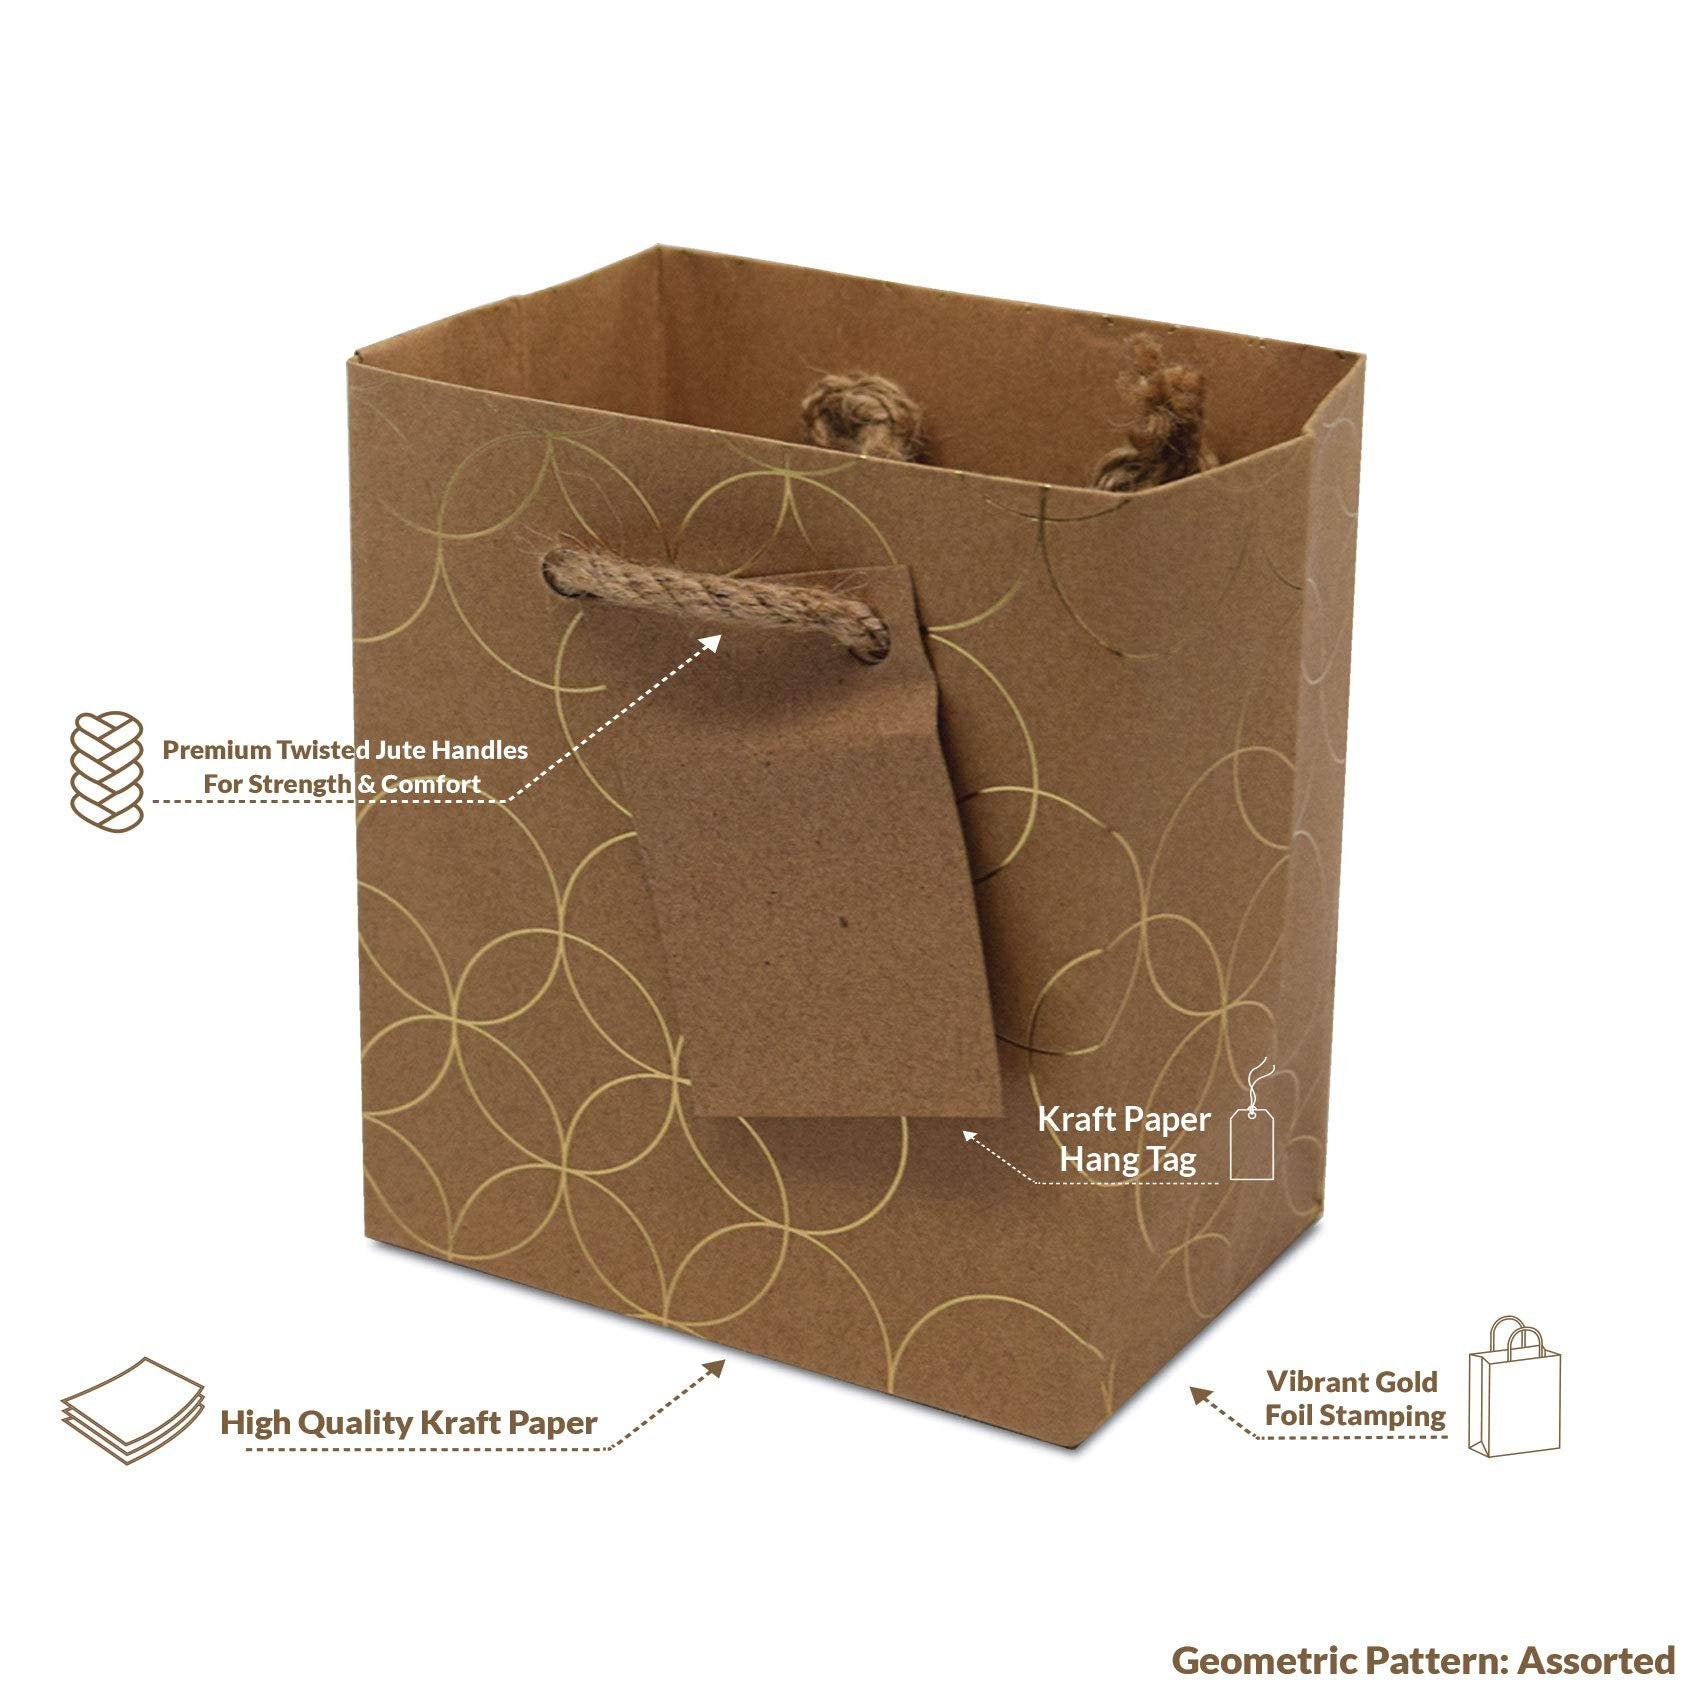 Gold Gift Bags - Mini Geometric Prints Kraft Paper Handles - 4x2.75x4.5 Inch (12 Pack) - Ideal for Parties, Bachelorette, Christmas